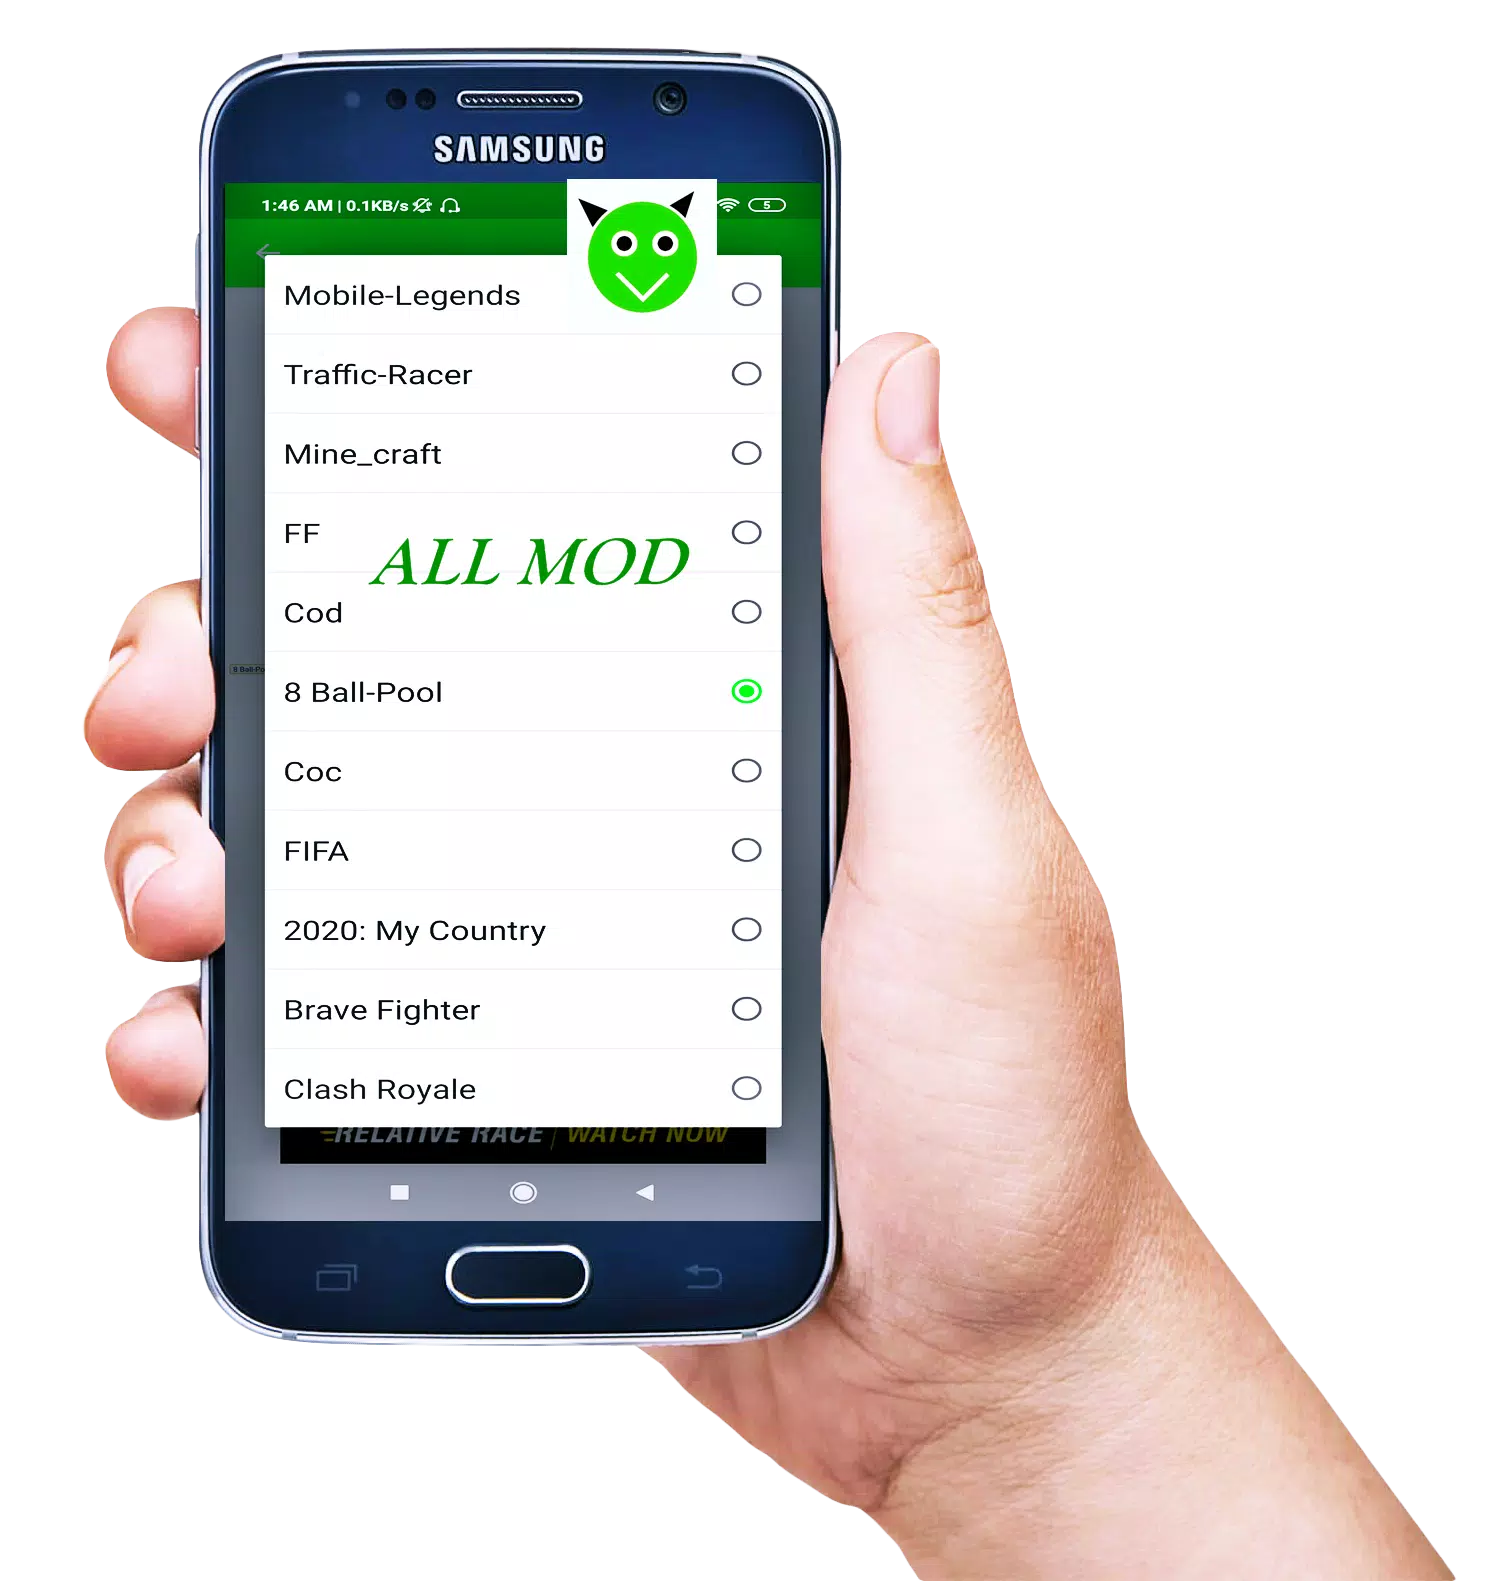 how to install happy mod and how to hack with happy mod #happymod